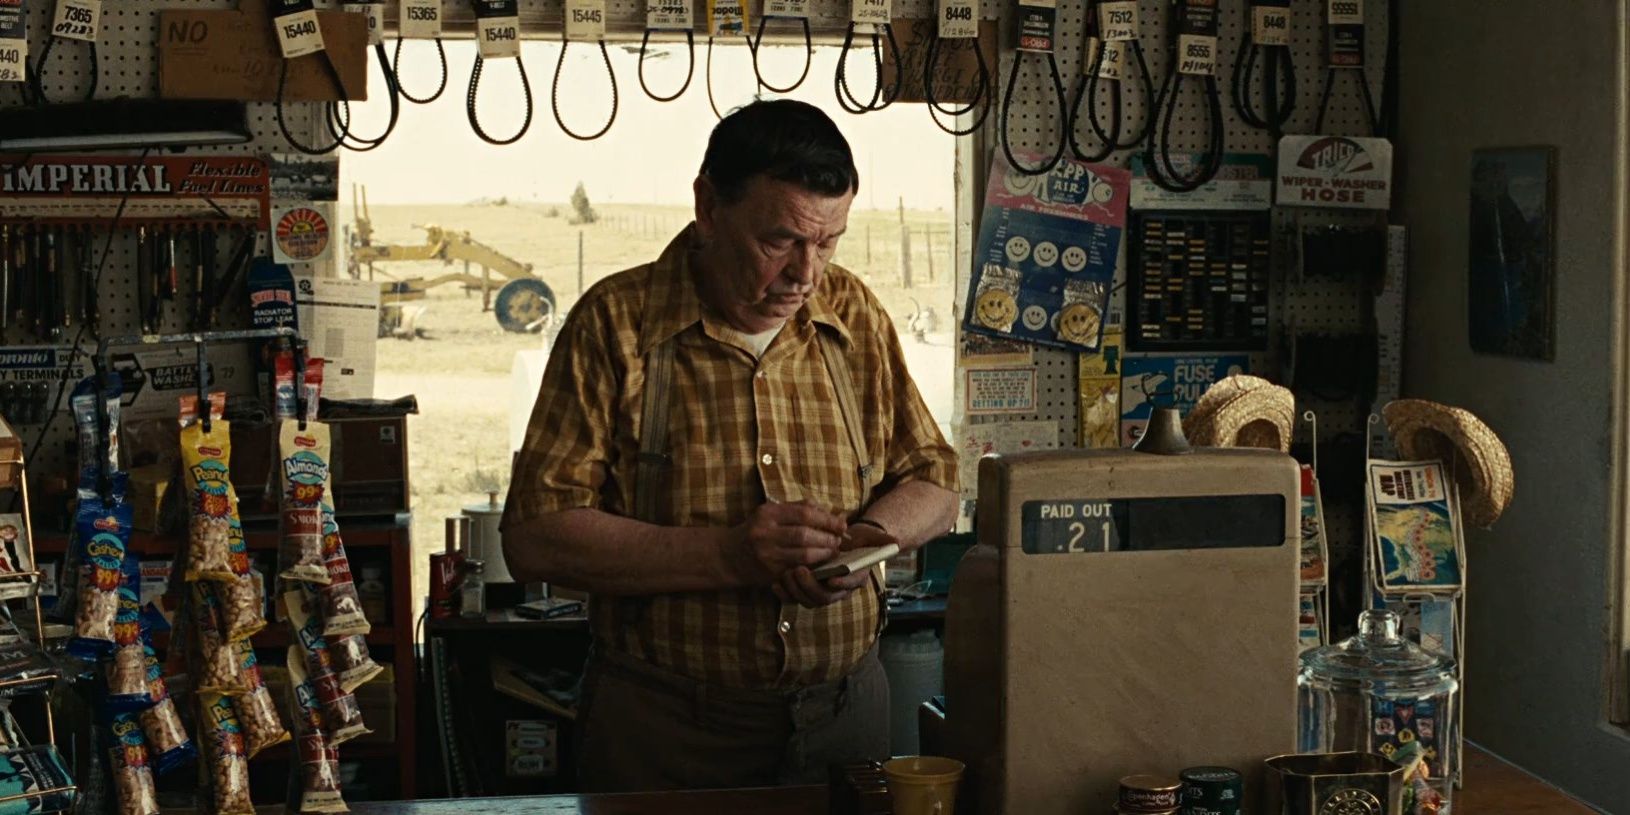 The Gas Station Attendant looking down in No Country for Old Men